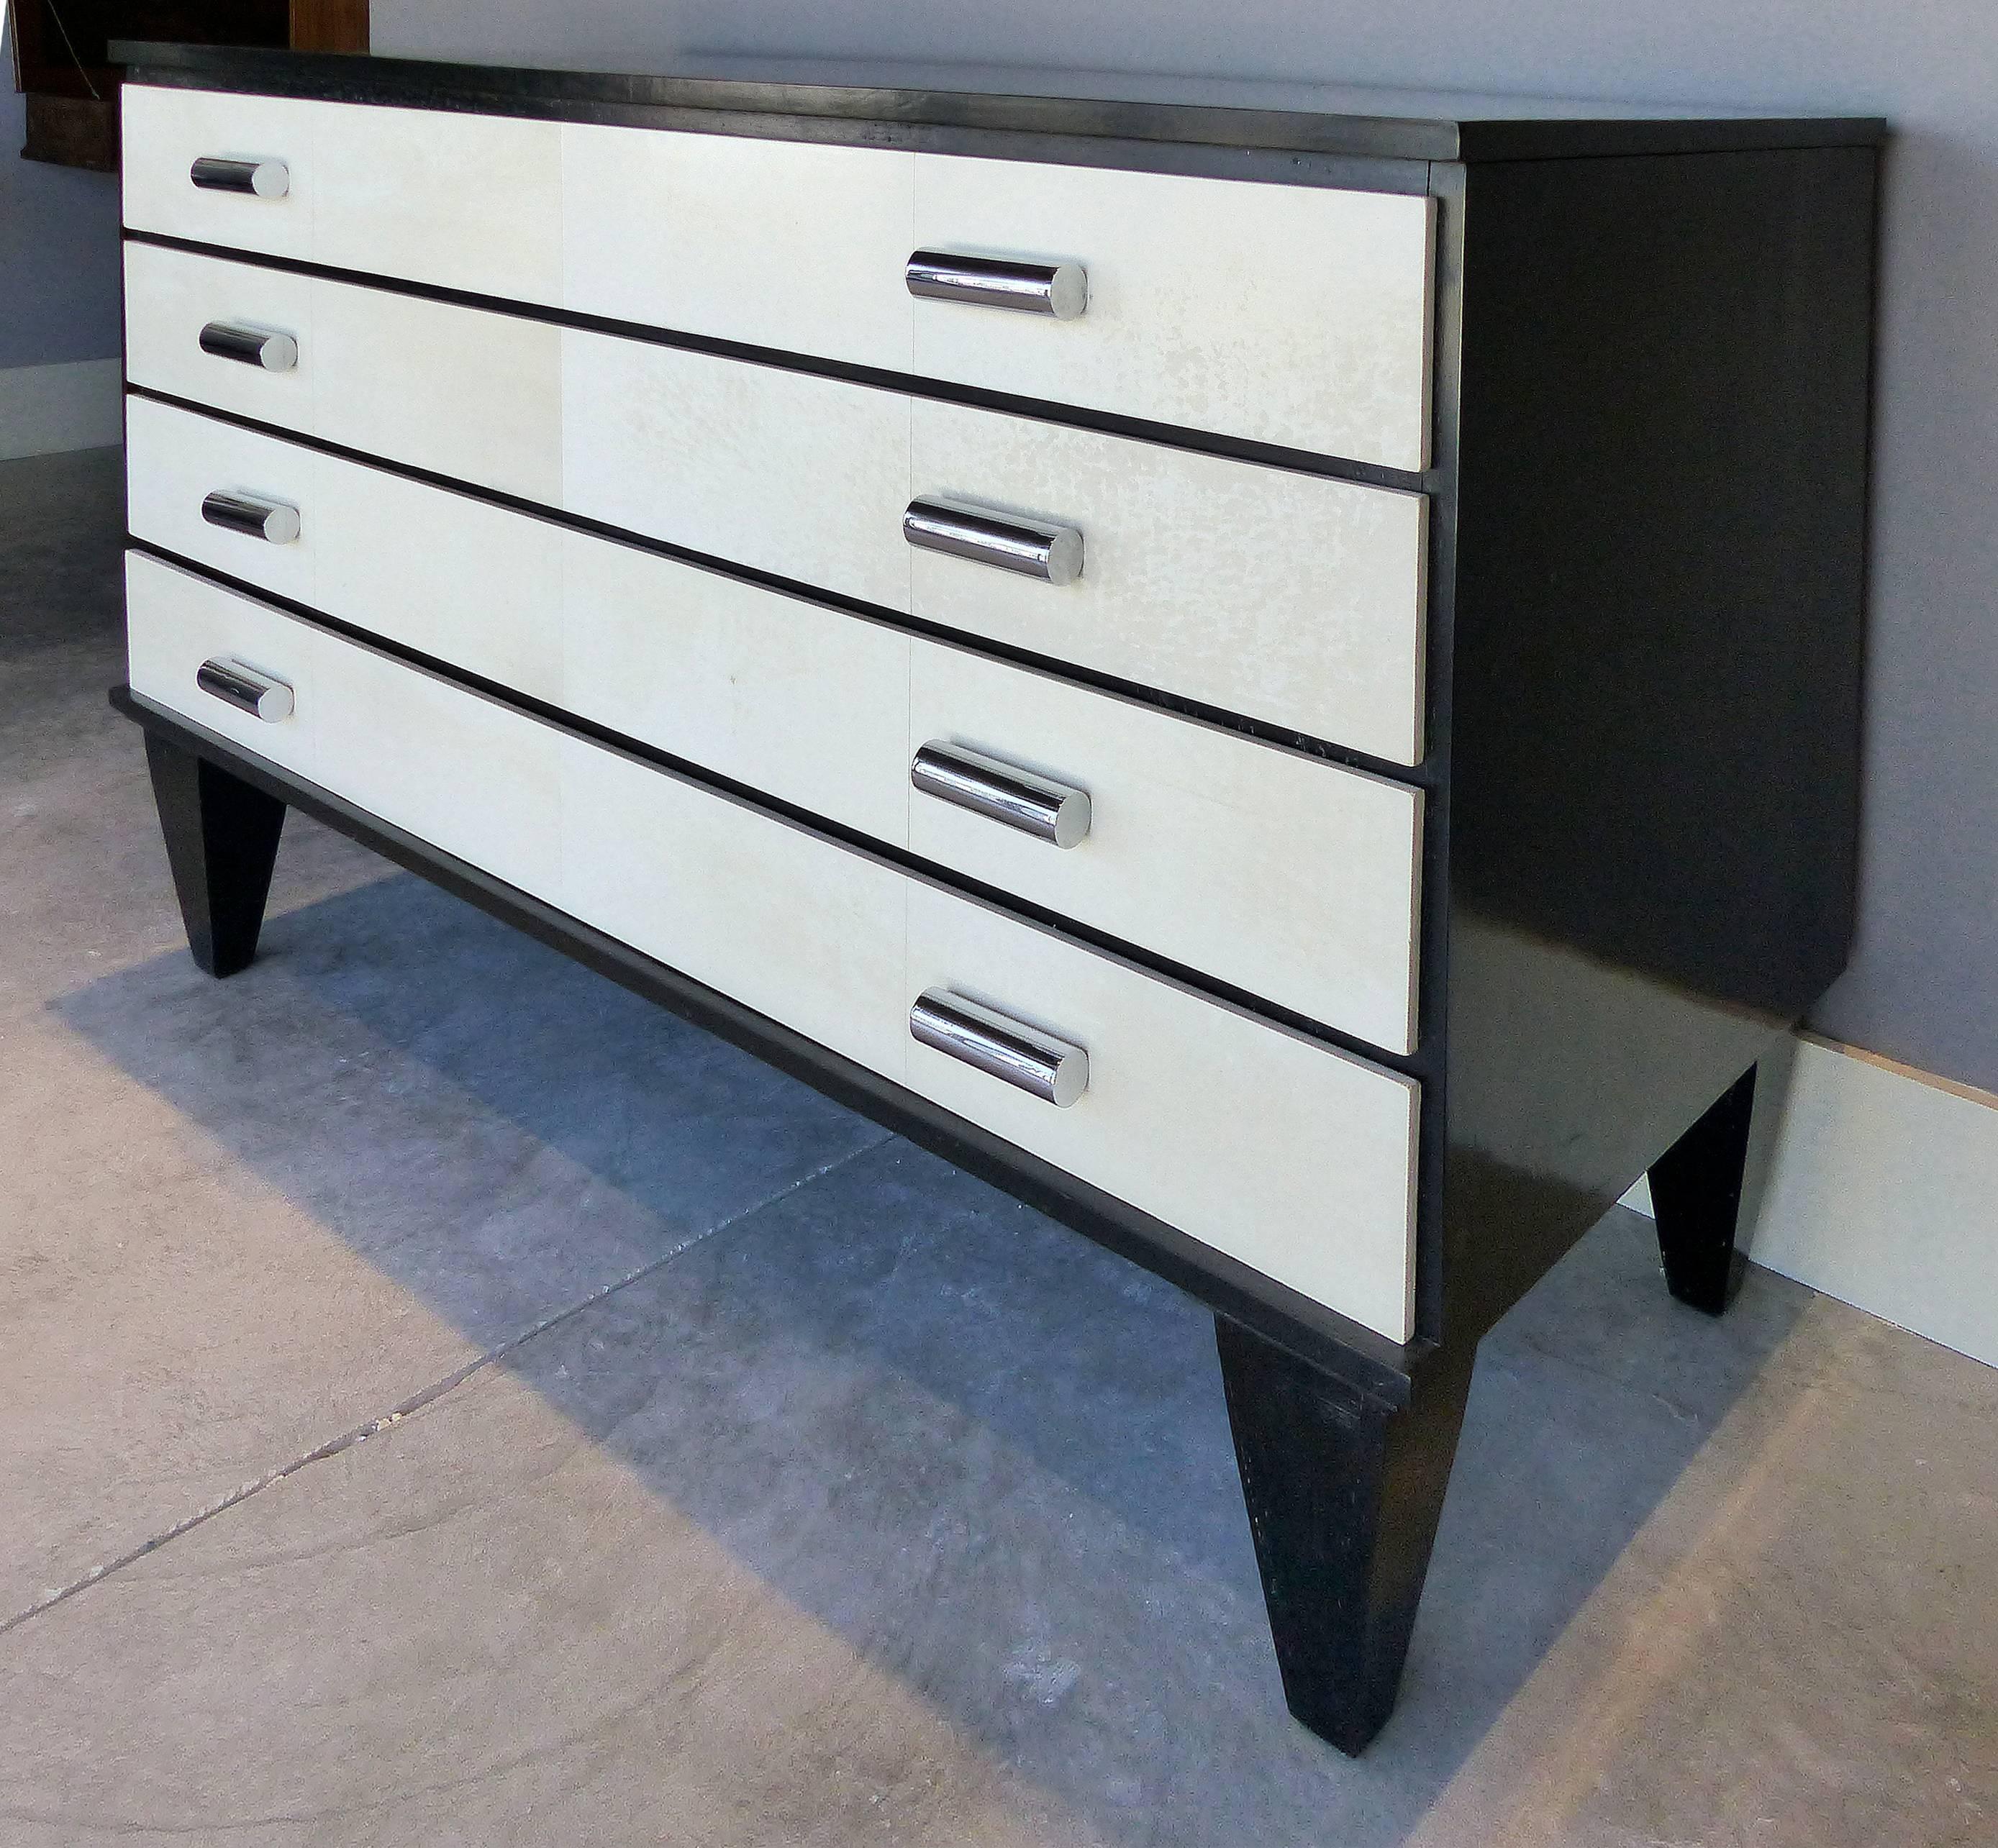 Art Deco Goatskin and Ebonized Mahogany Four-Drawer Dresser

A large and substantial four-drawer dresser with goatskin clad drawers and solid wood construction. Ebonized mahogany finish and stainless steel drawer pulls accent this high quality chest